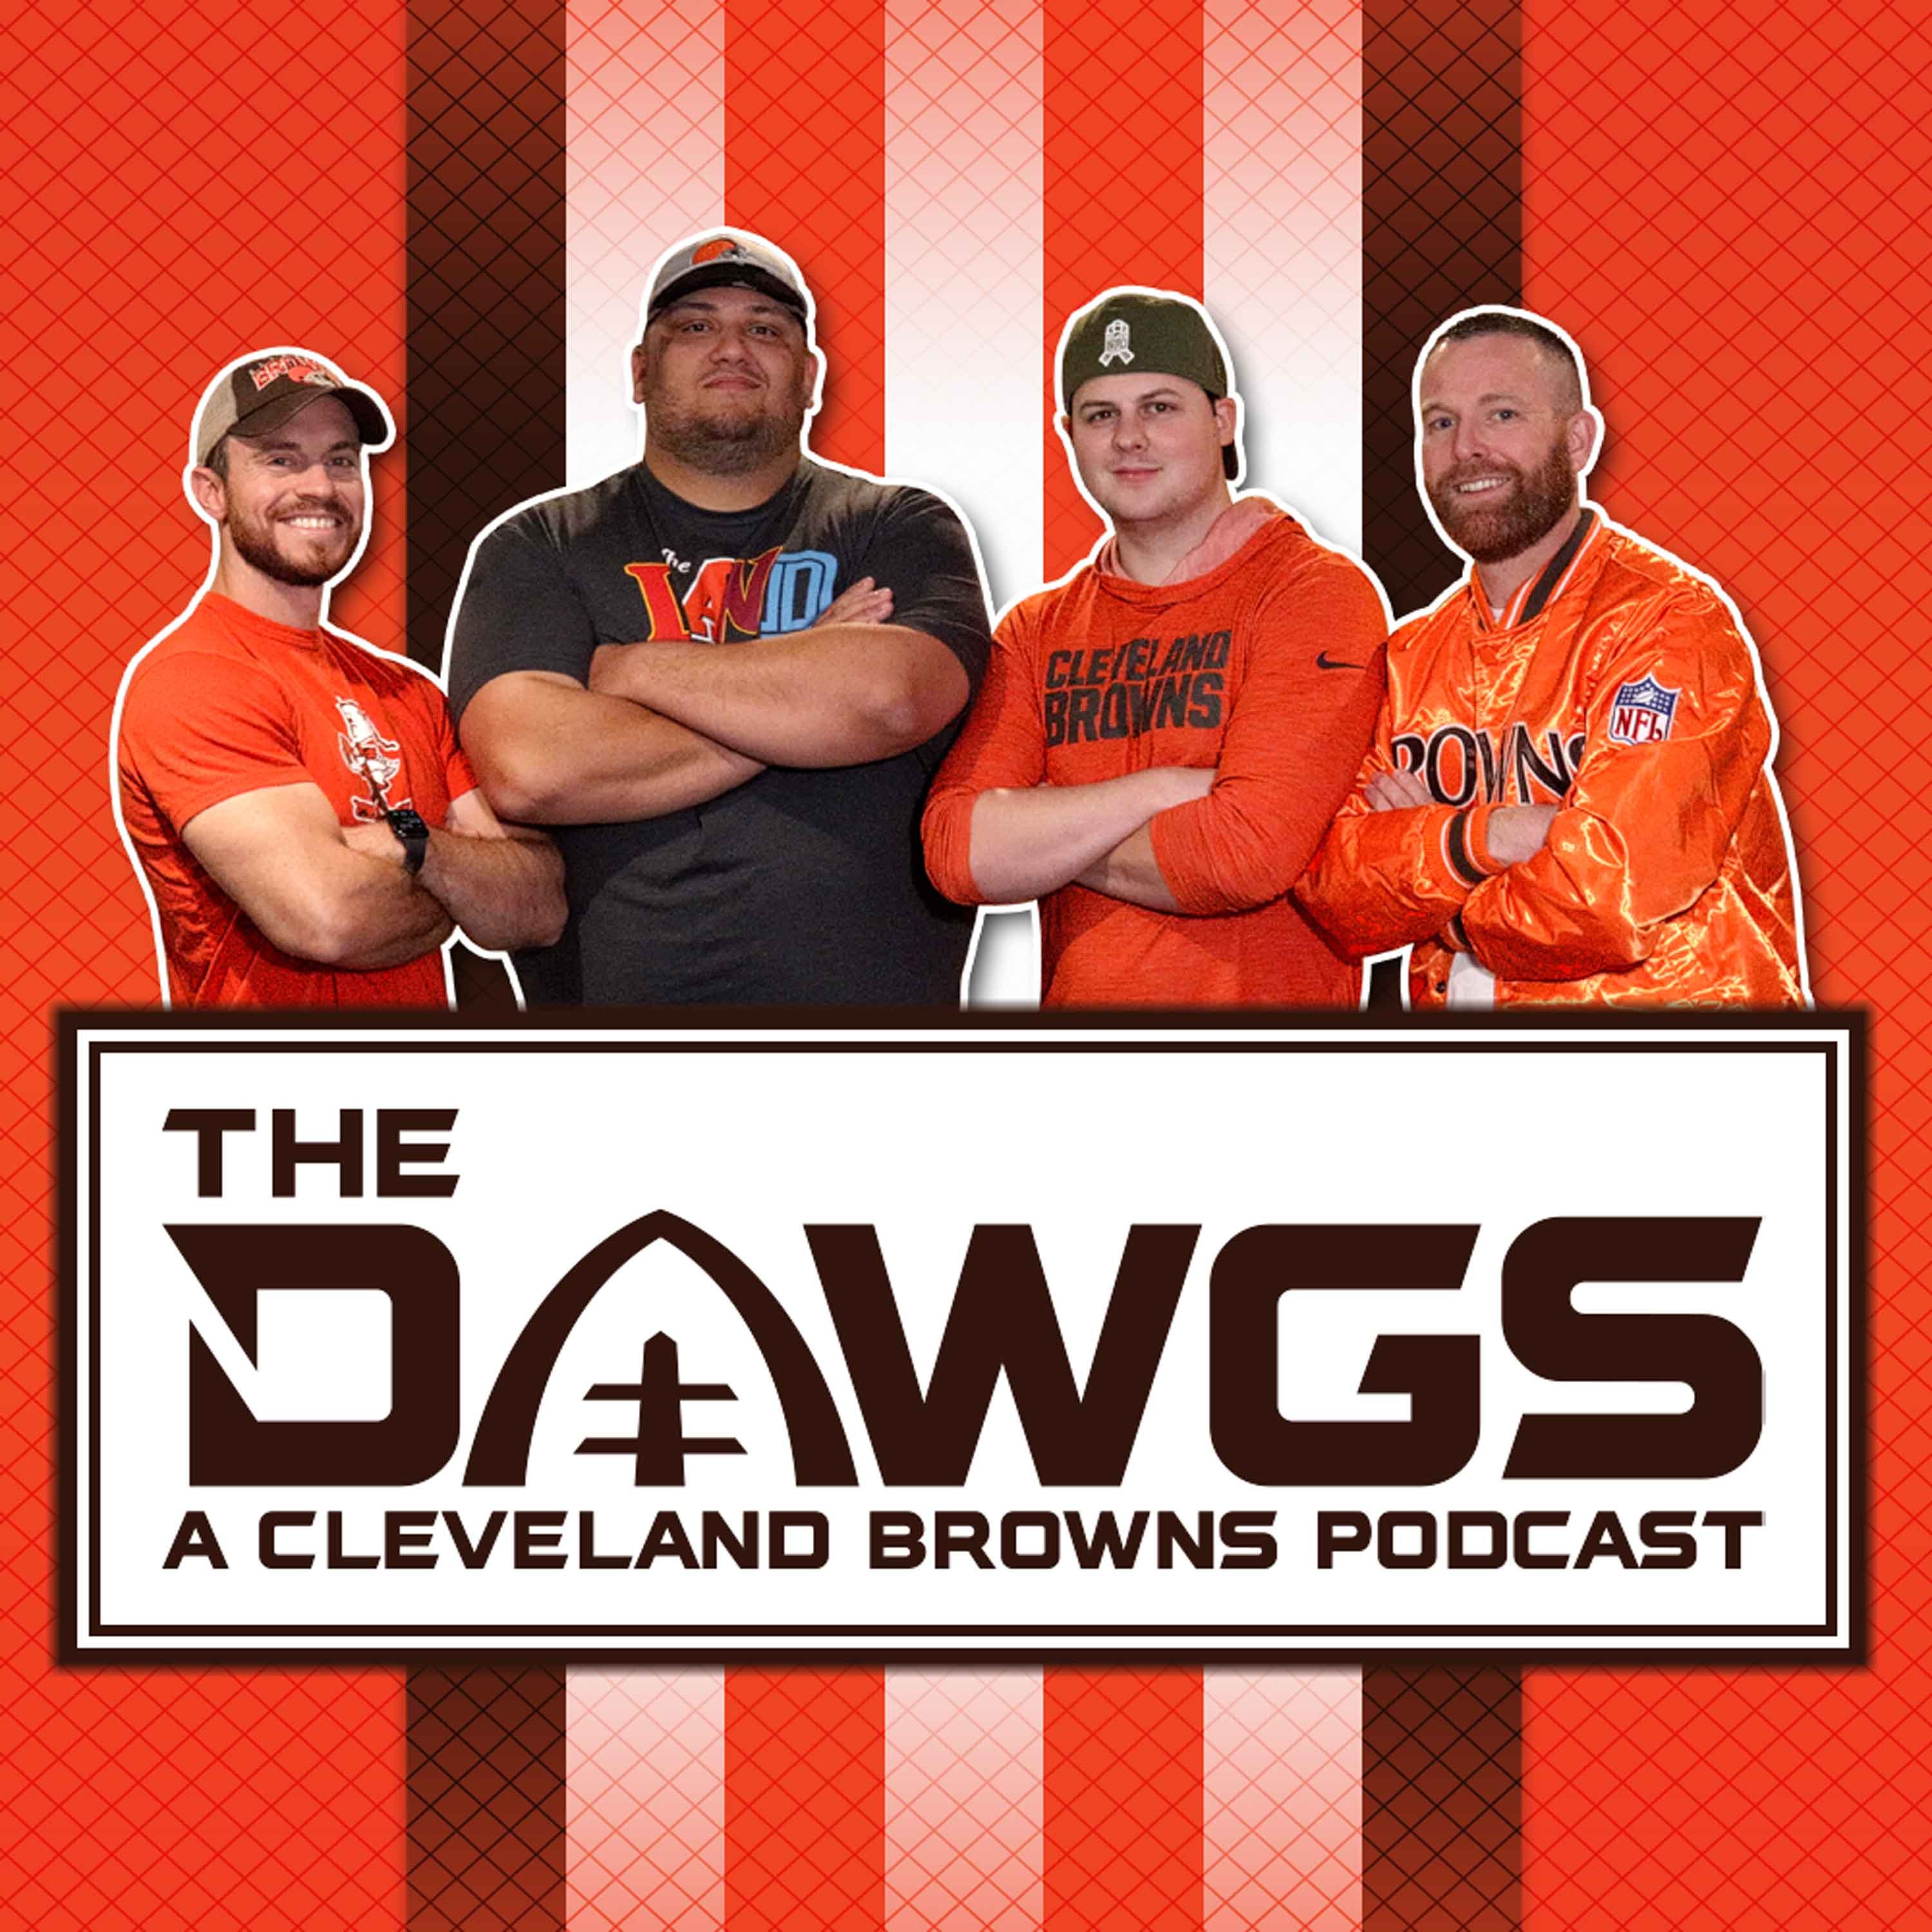 Deshaun Watson Receives 6-Game Suspension  | The Dawgs - A Cleveland Browns Podcast - August 1, 2022